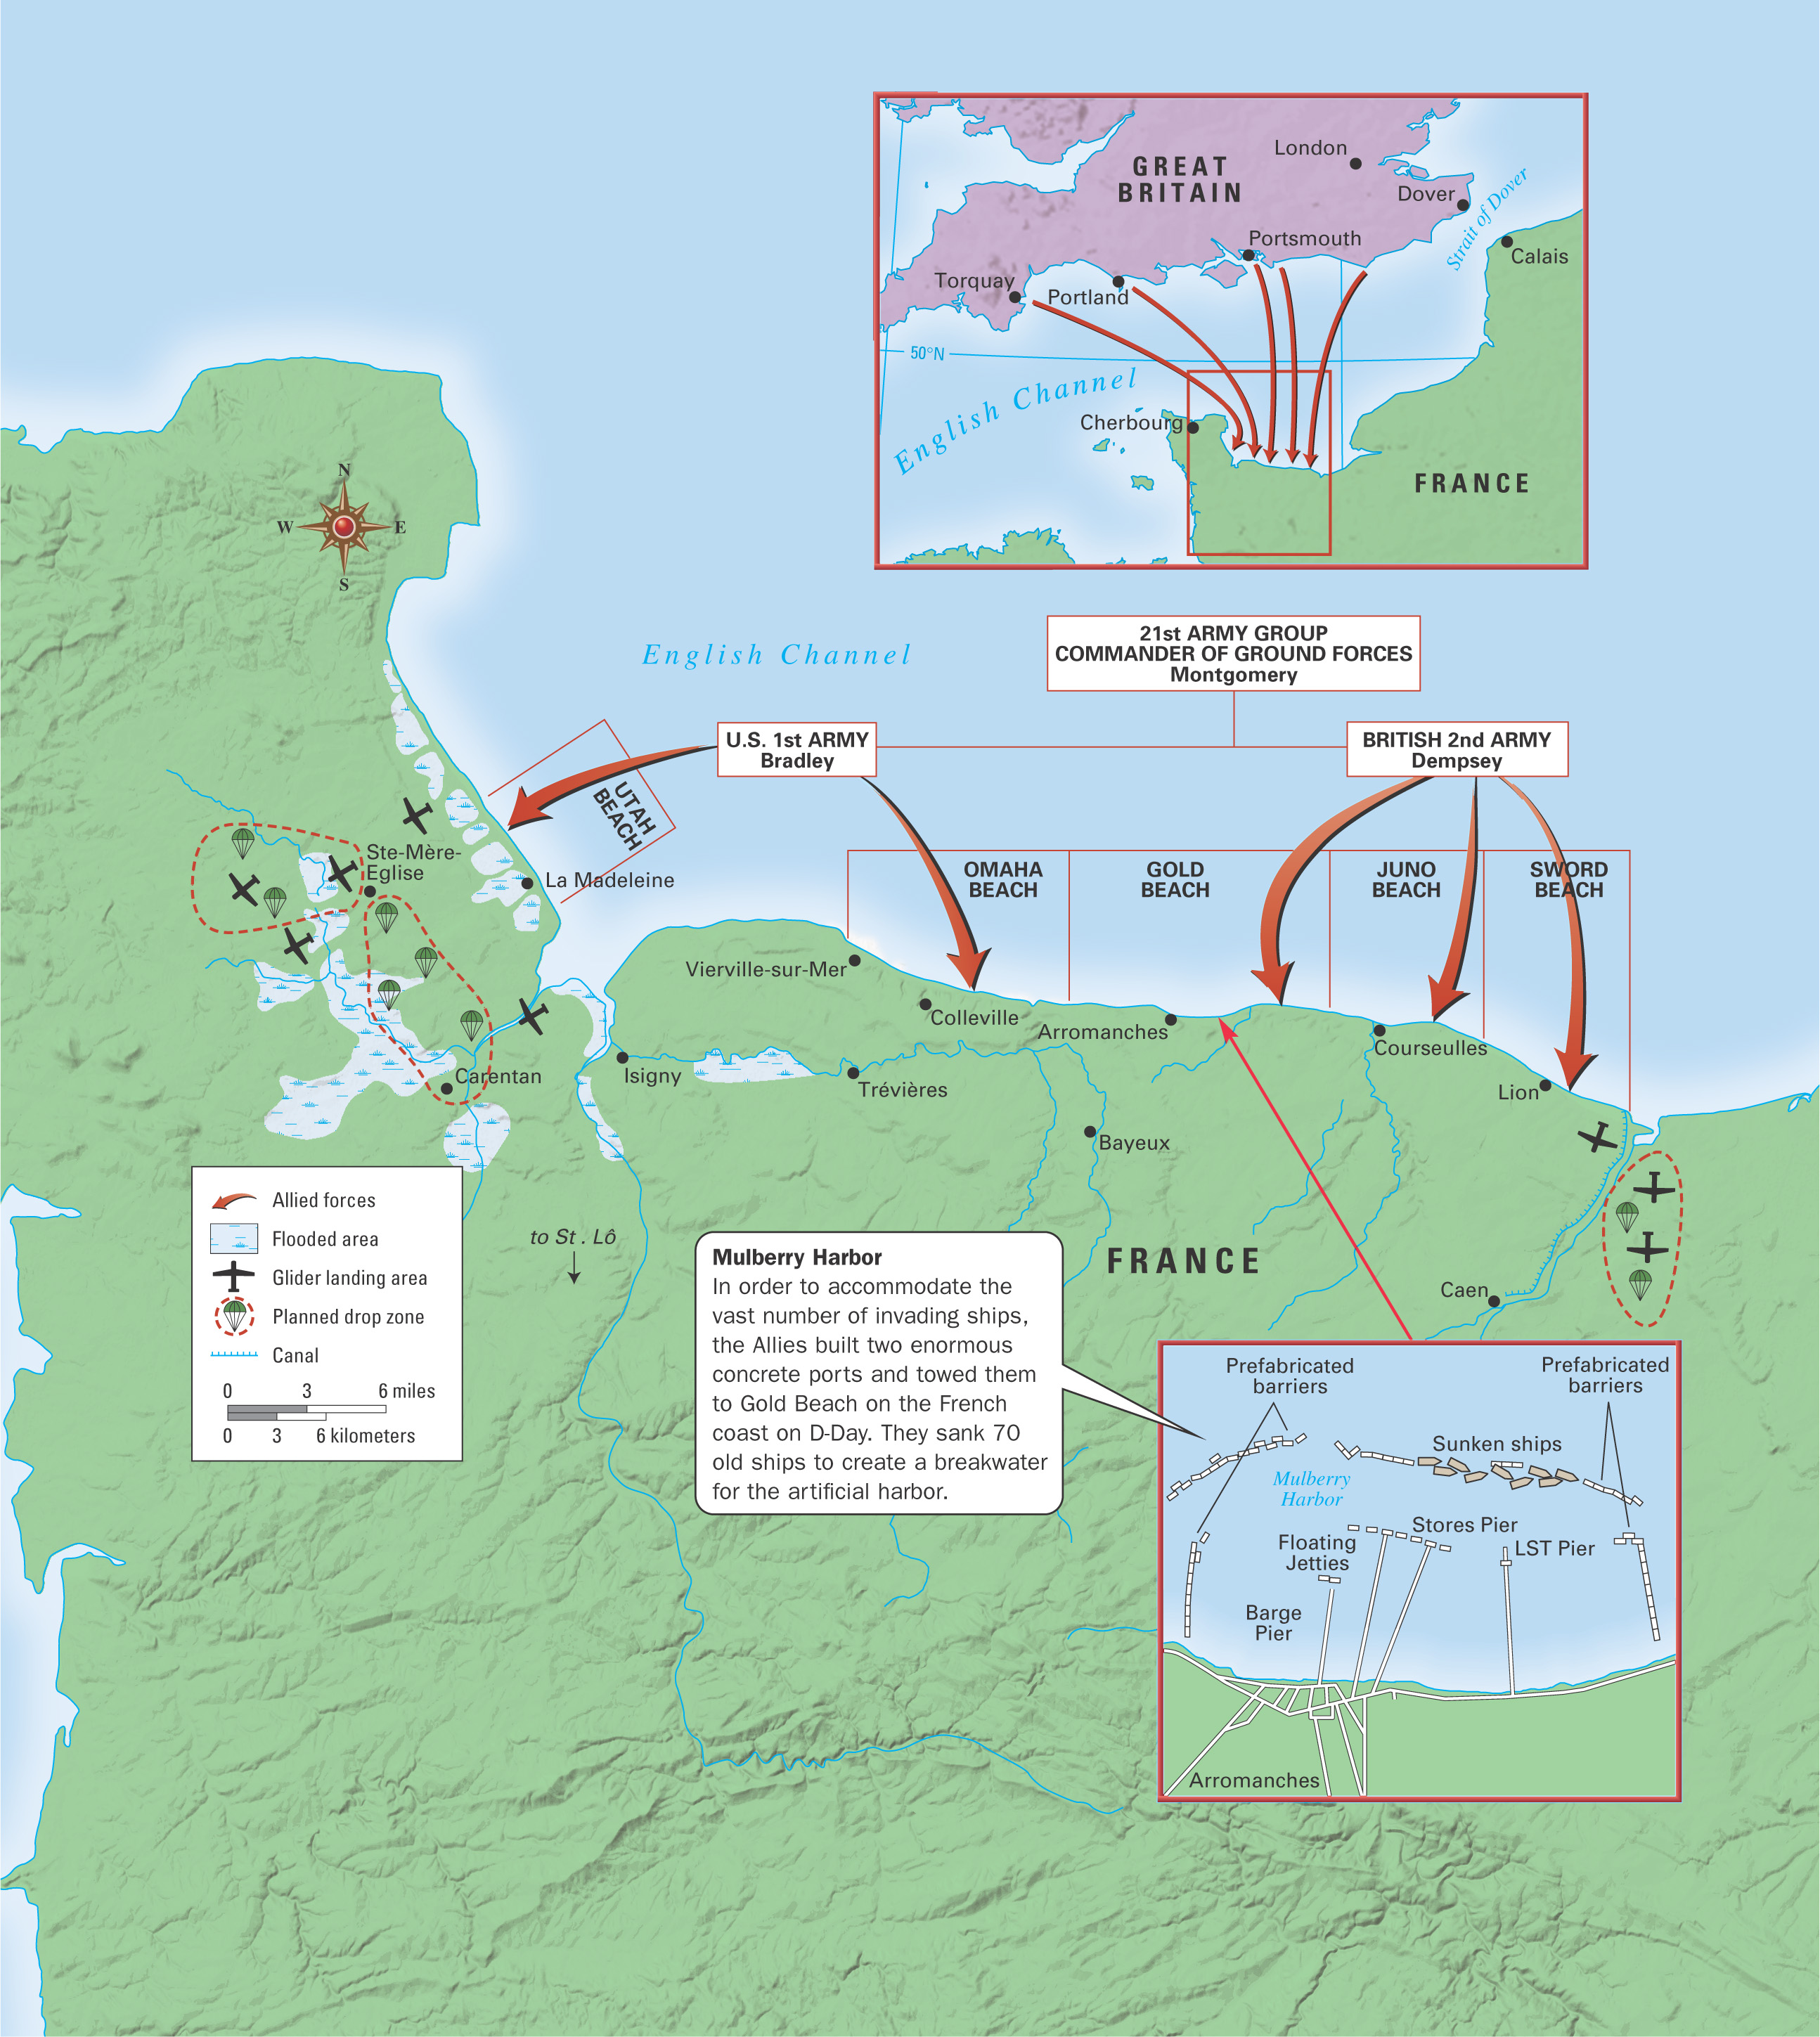 Map with 2 Map Insets: Normandy Invasions, D-Day, June 6, 1944